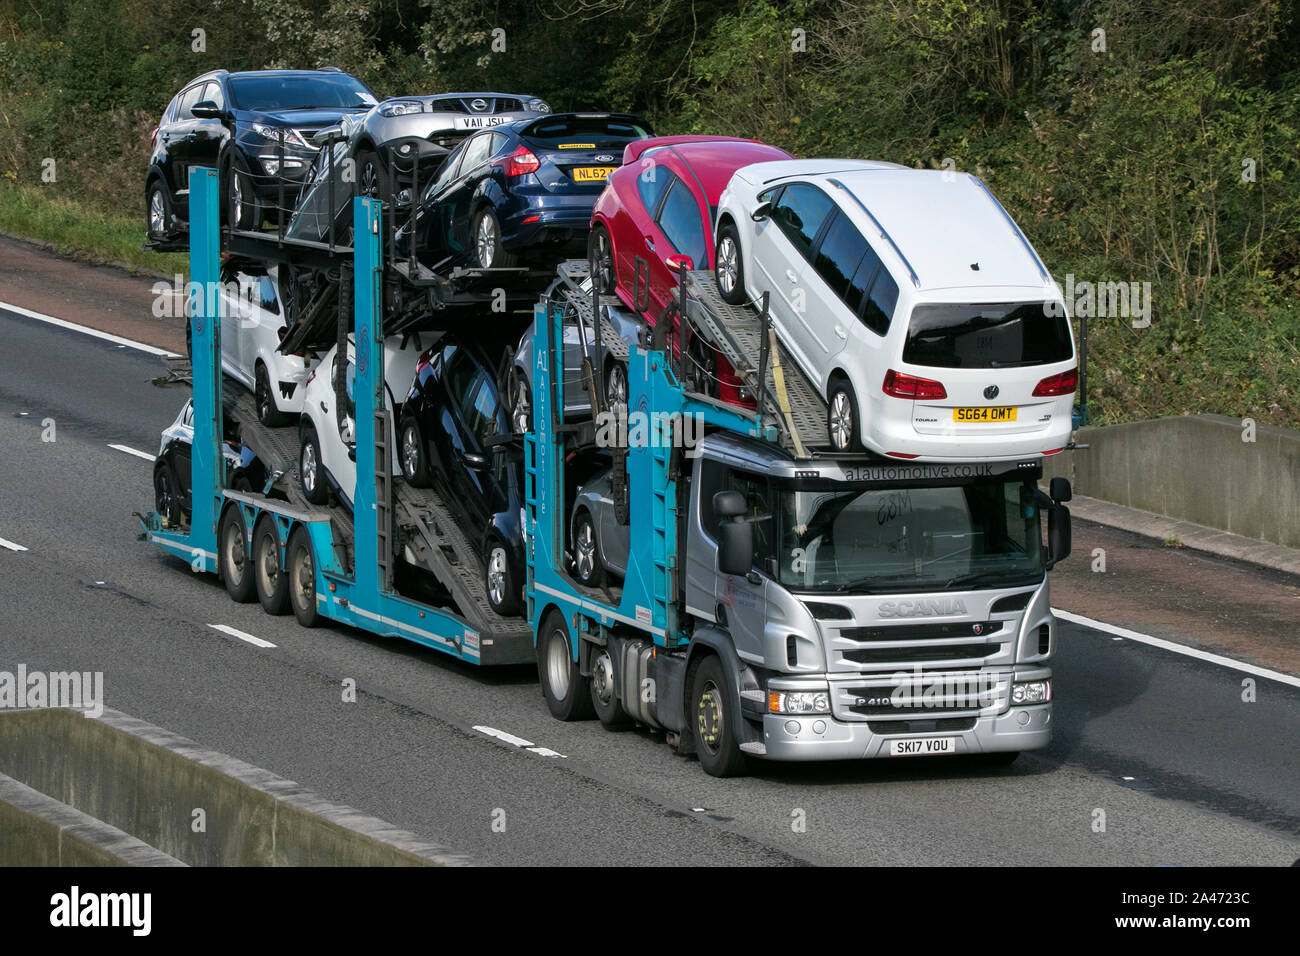 A Scania P410 heavy goods vehicle hgv transporting second hand cars on trailer southbound on the M6 motorway near Preston in Lancashire, UK Stock Photo